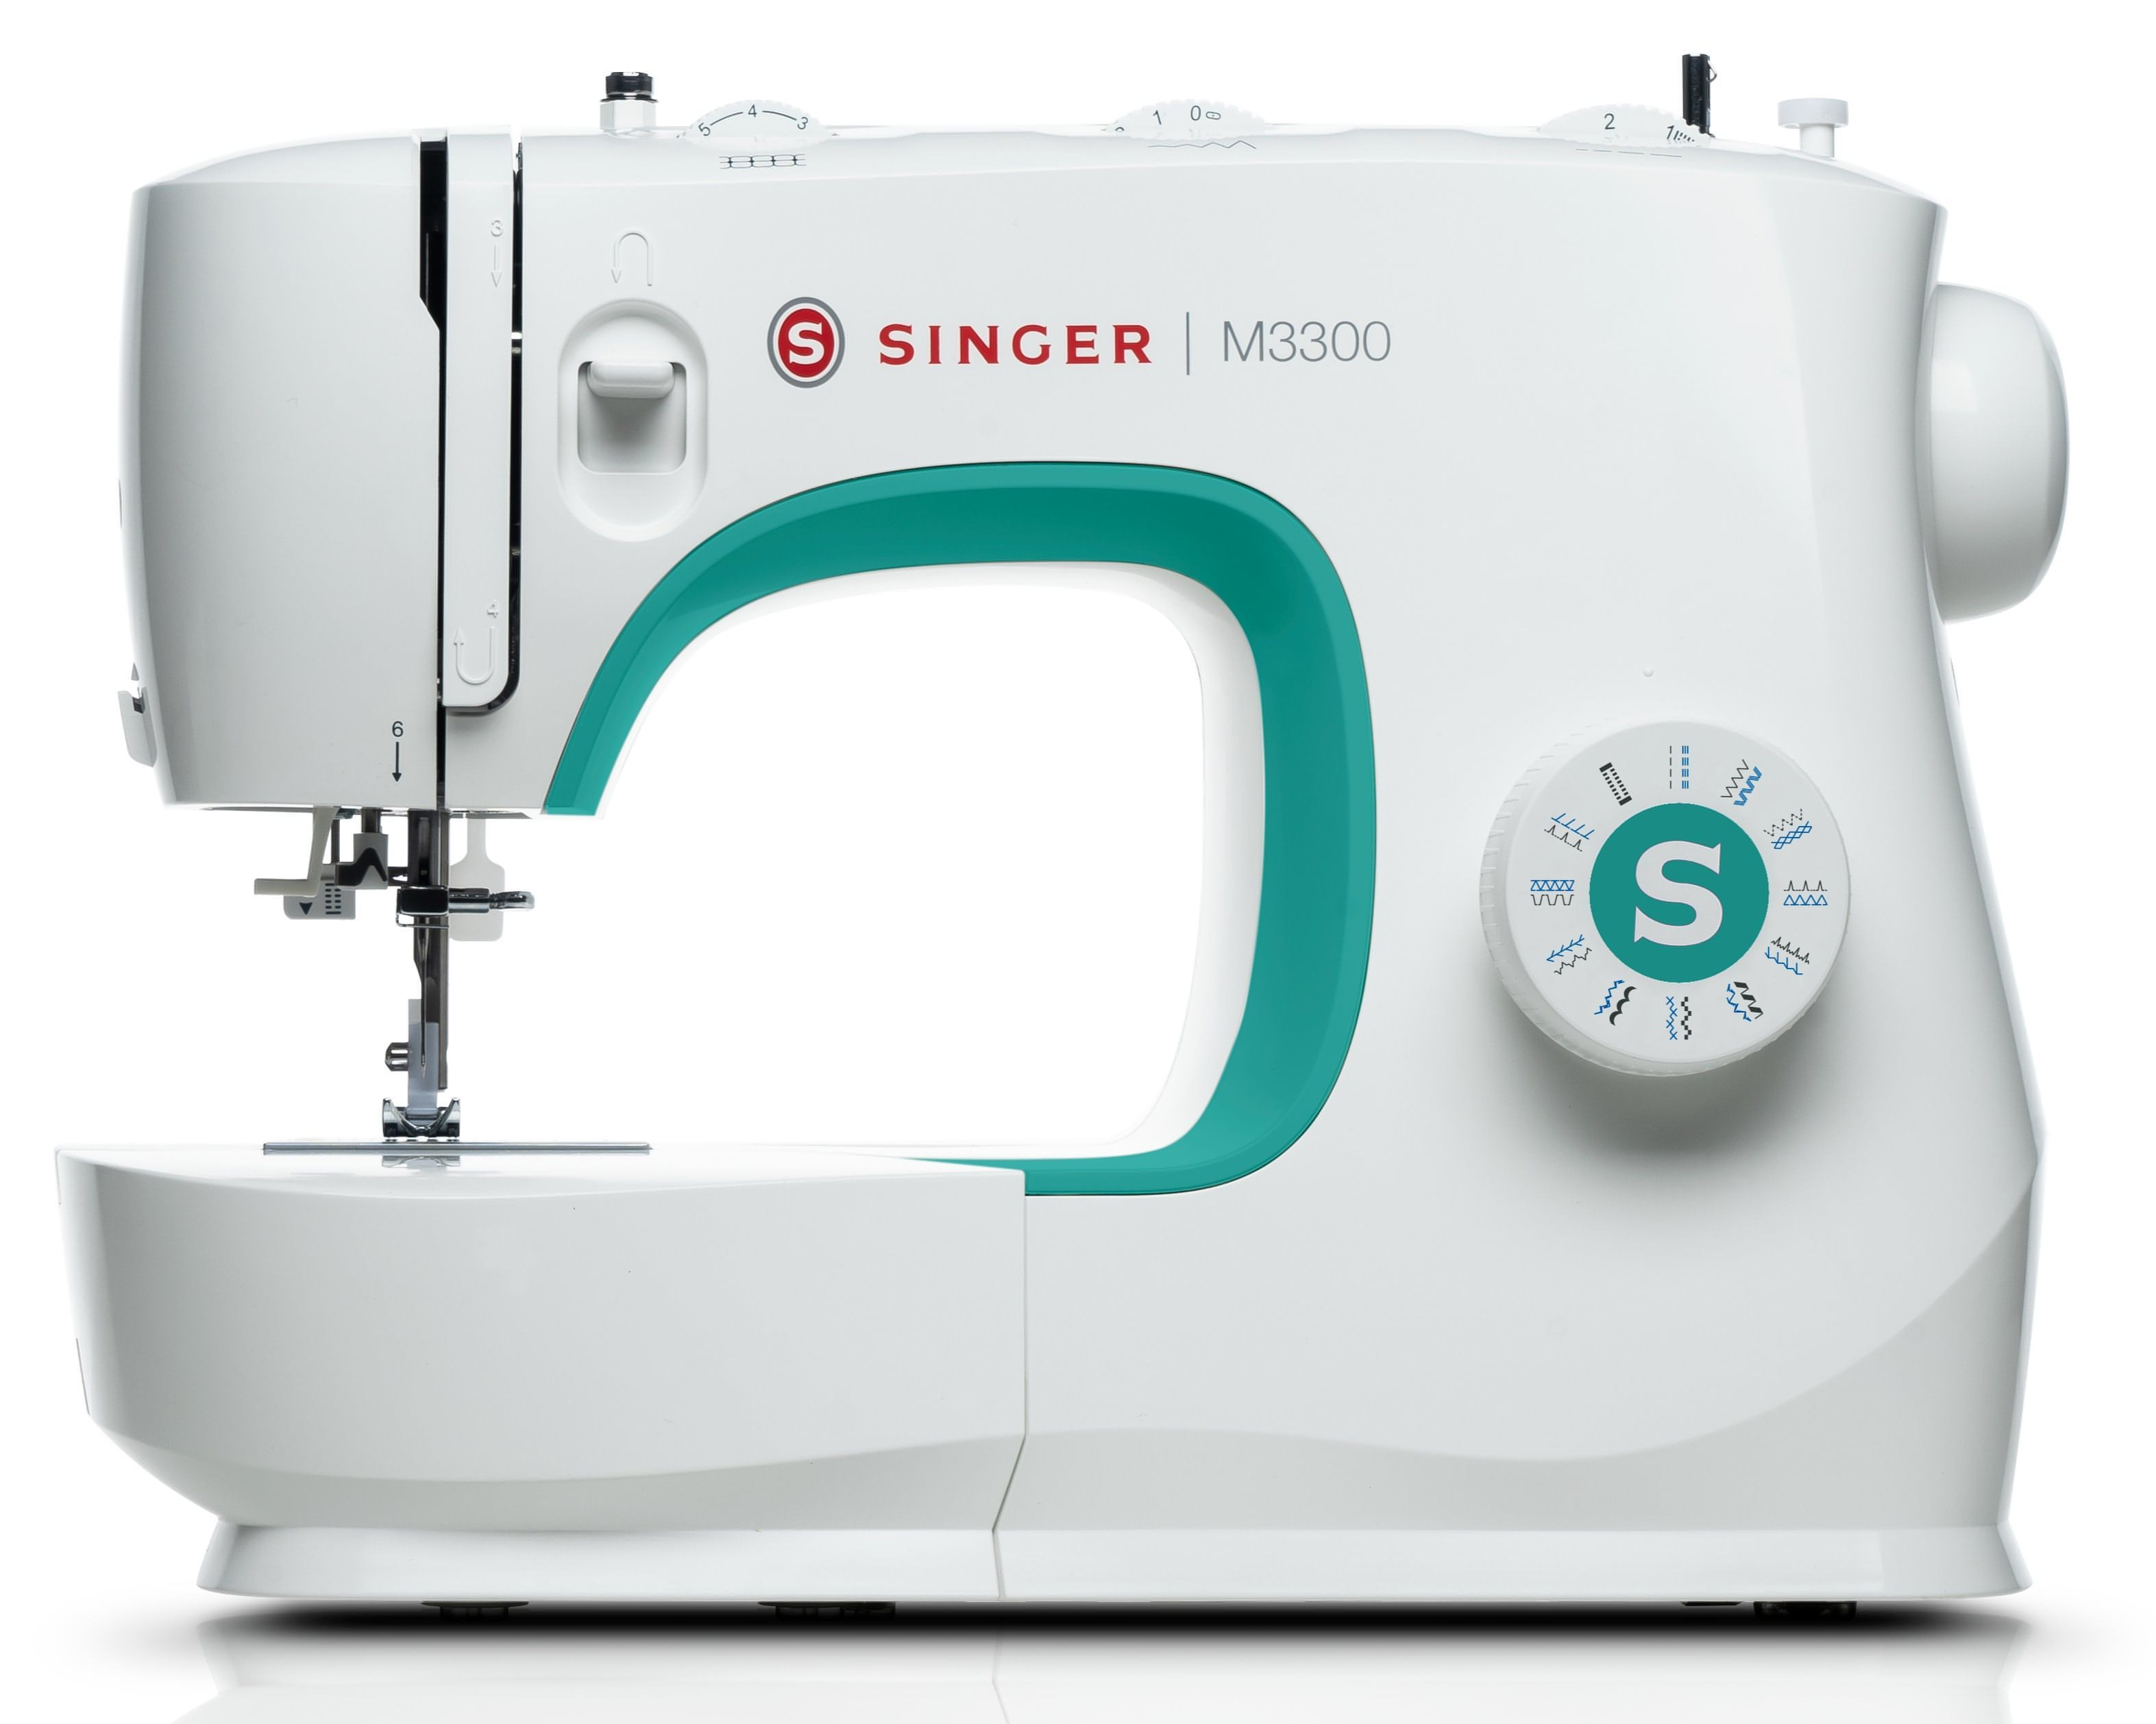 Singer M33 - 23 stitch patterns * Exclusive to Singer Outlet - ﻿FREE Upgrade offer to 32 stitch patterns when you order this item * Features 1 step buttonhole and auto threader